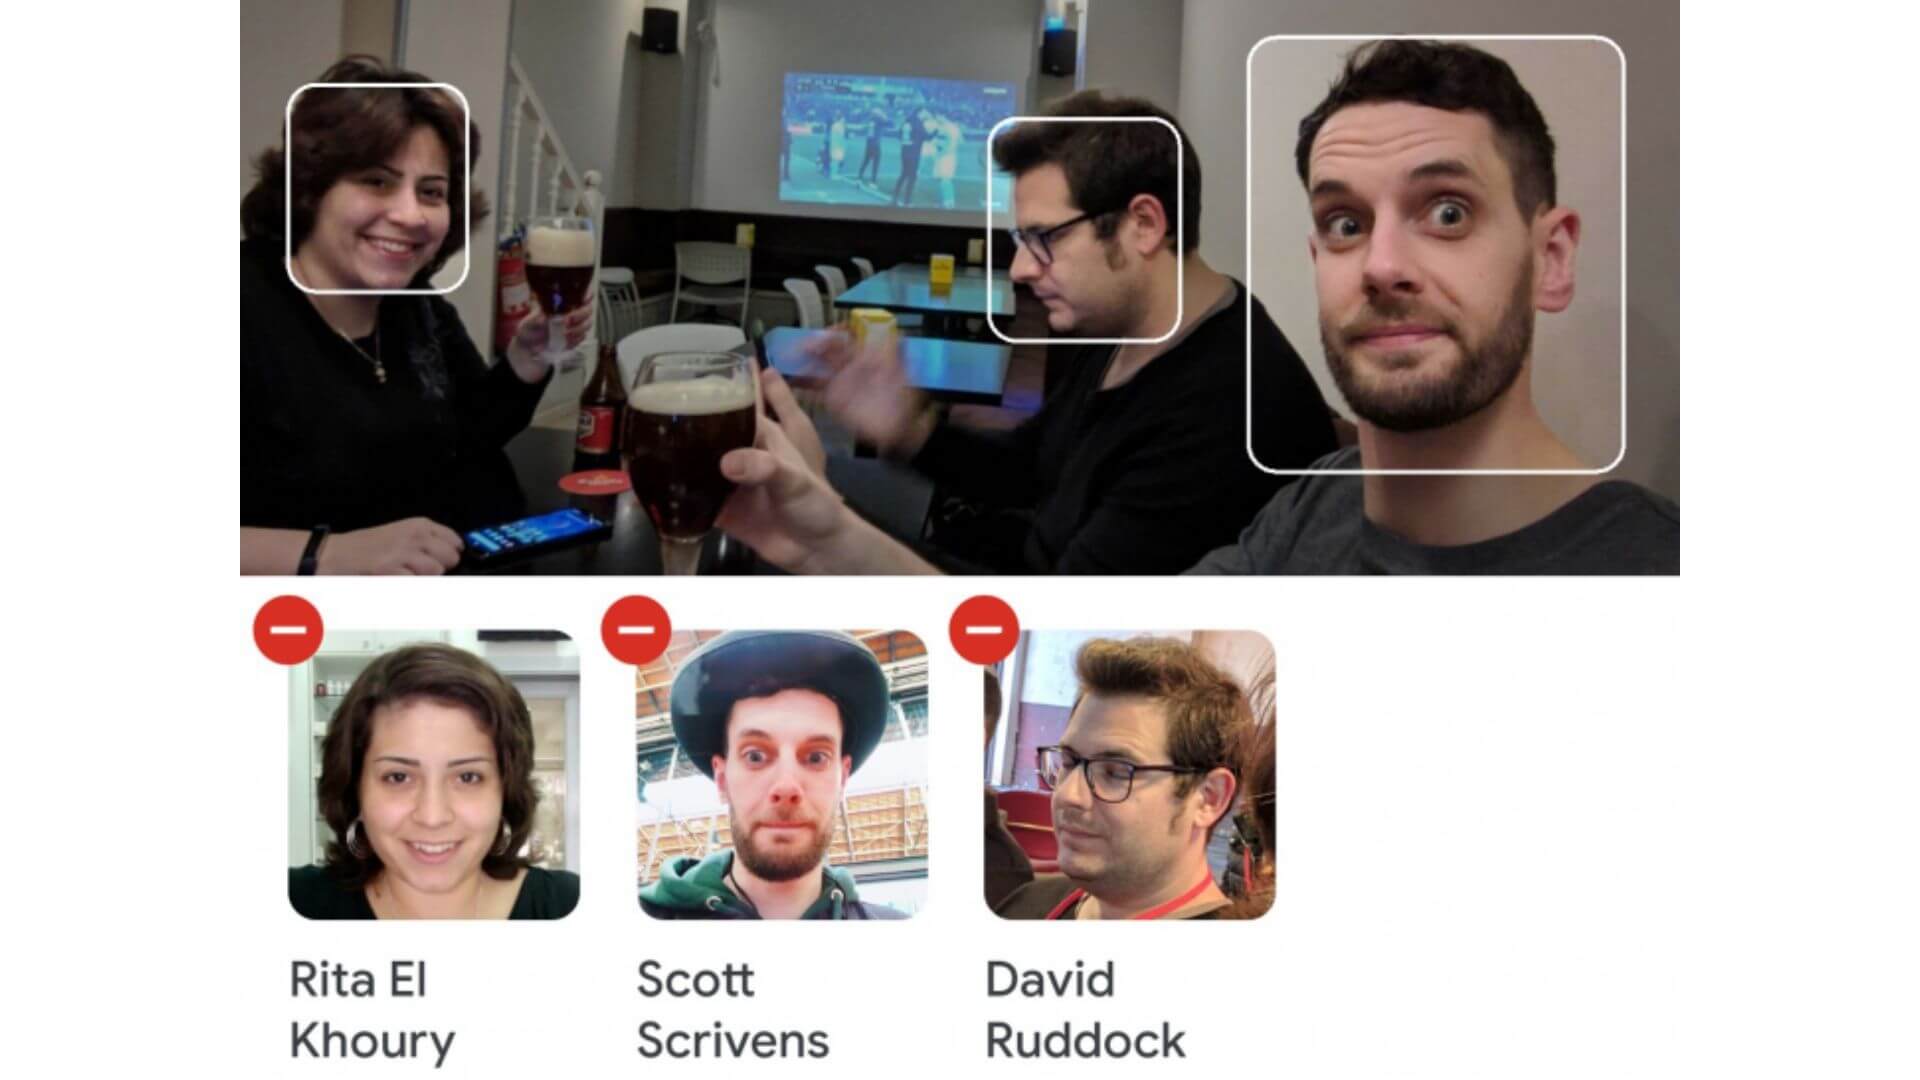 How to manually tag people in Google Photos